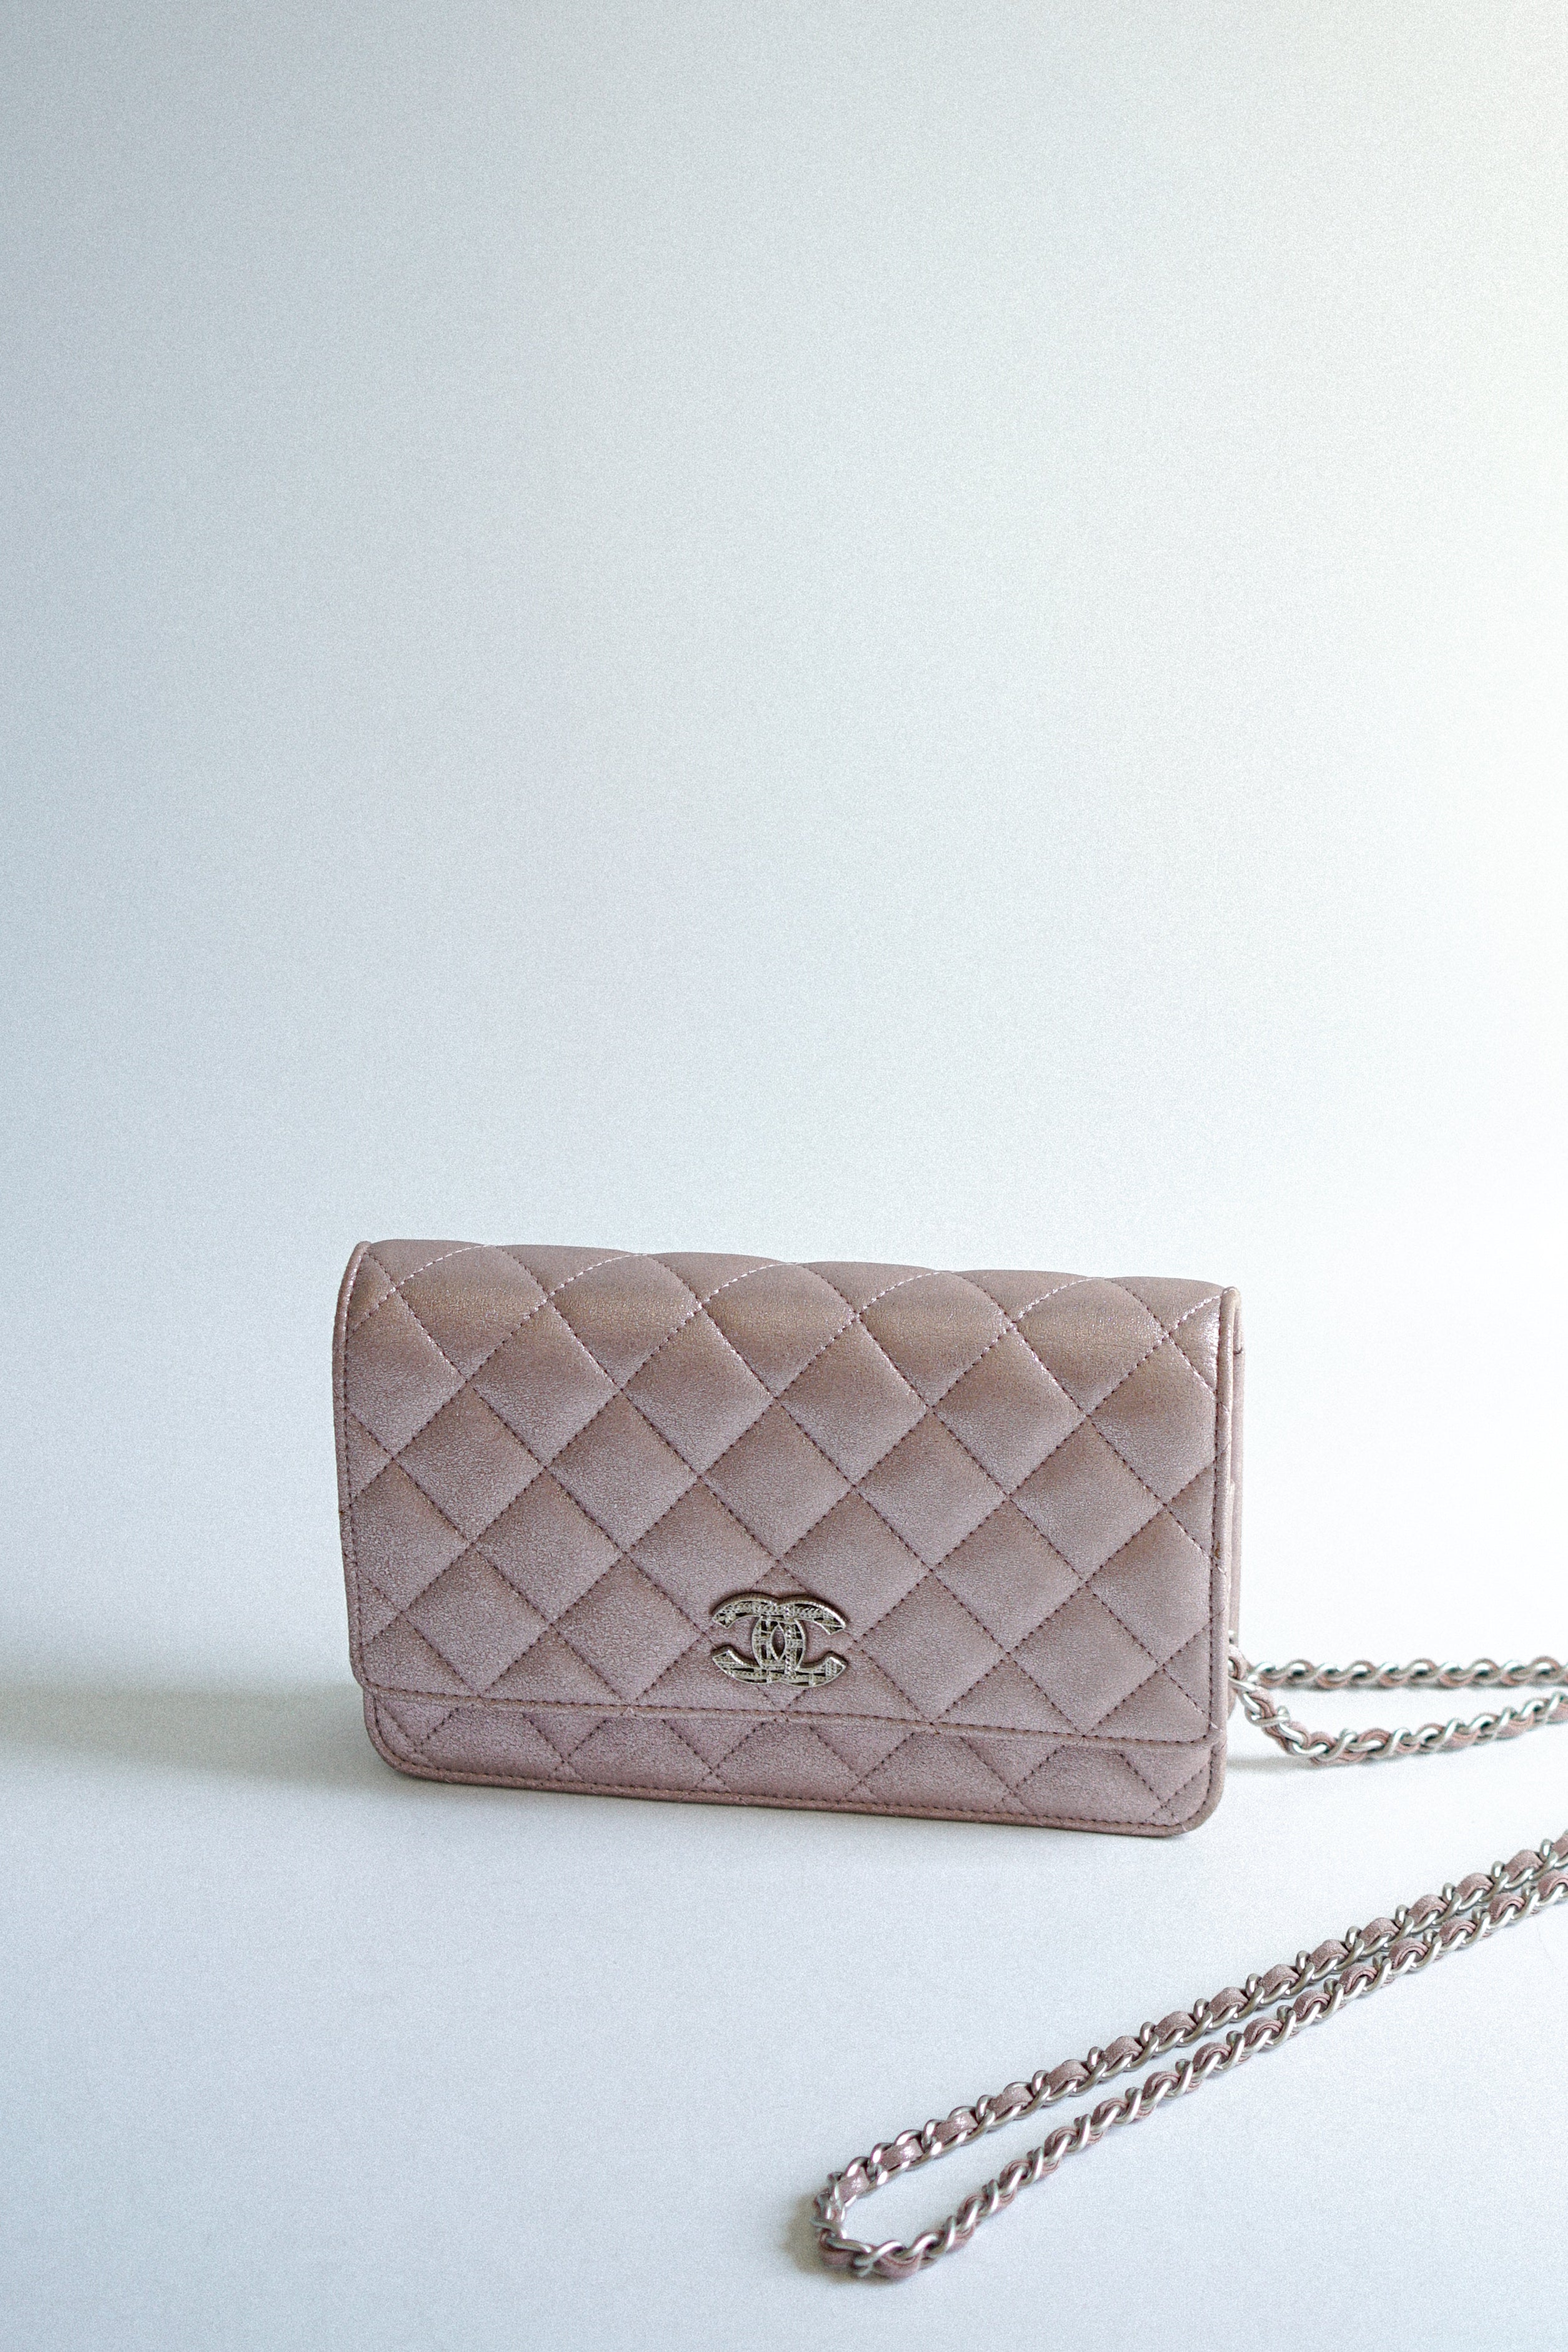 Chanel CC Wallet on Chain in Iridescent Pink Calfskin and Silver Hardware Series 21